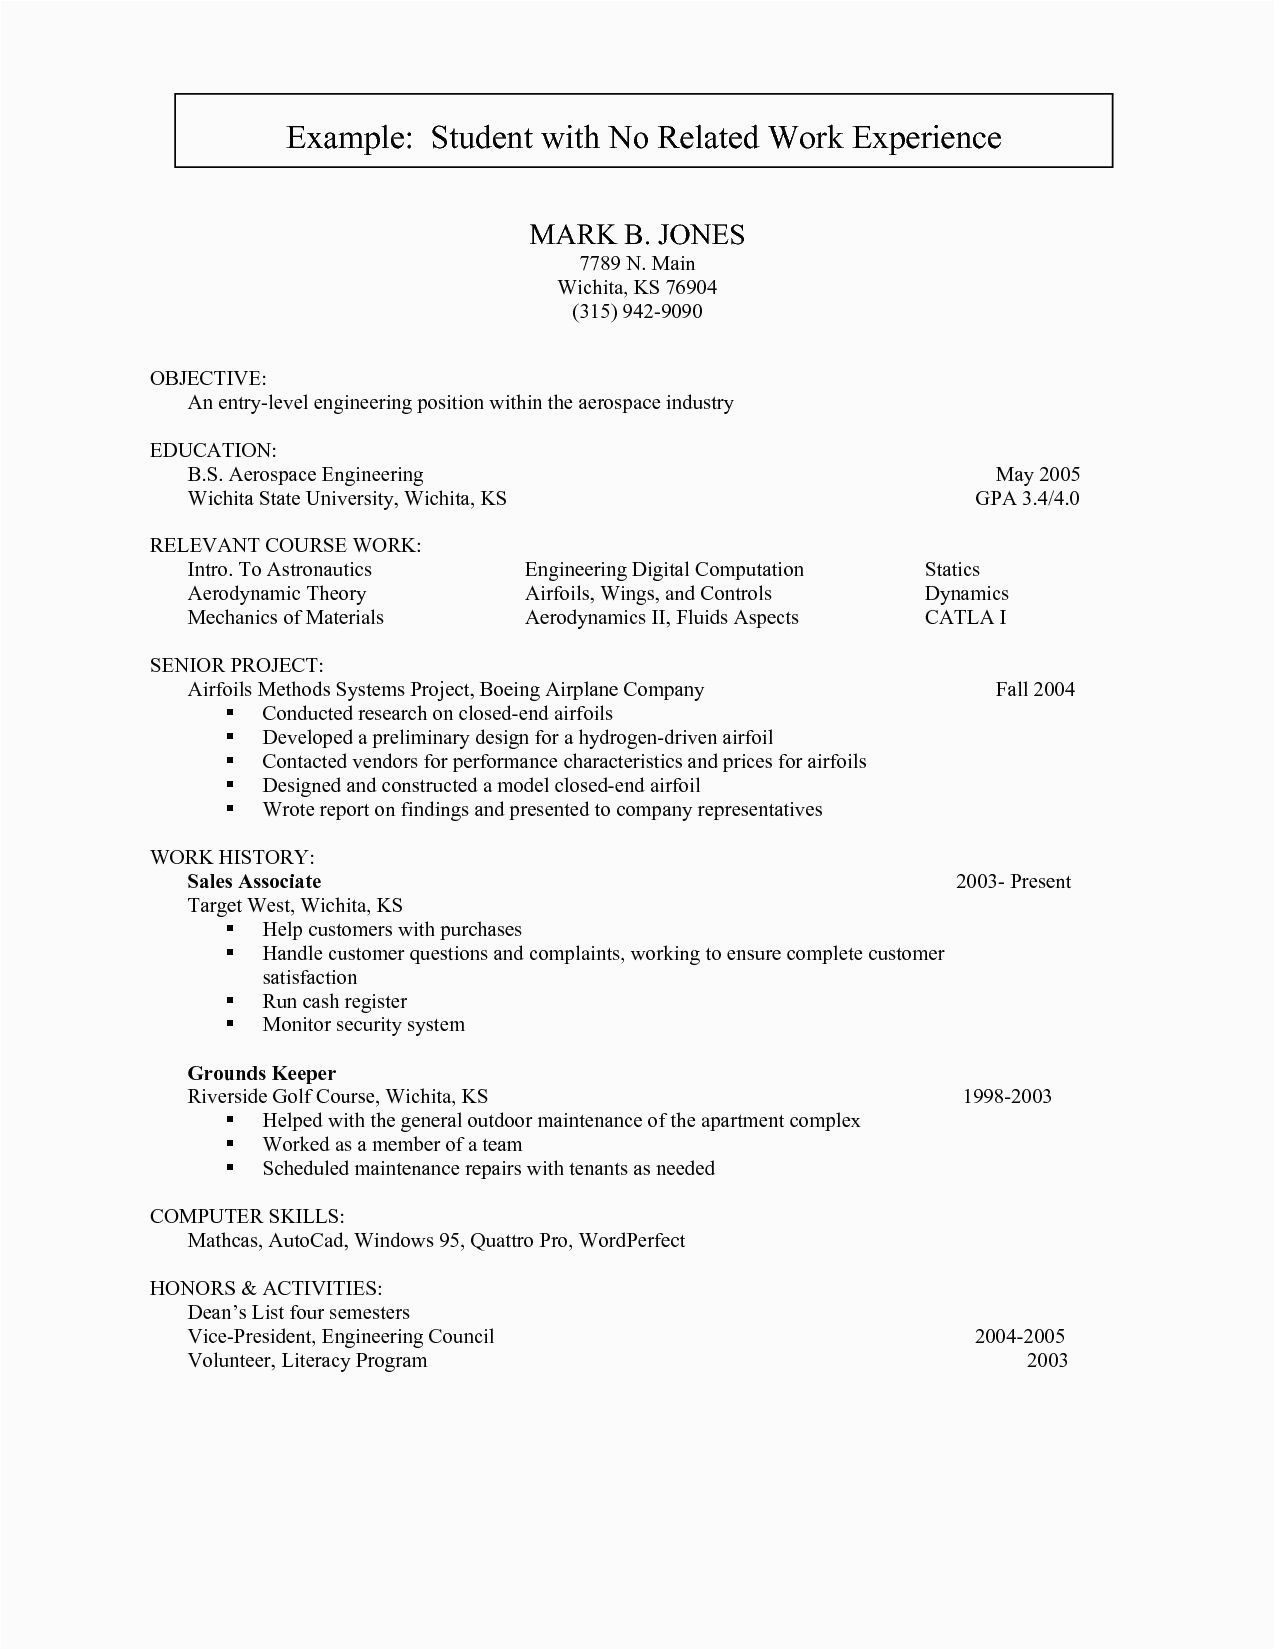 Resume Template for People with No Experience Resume Examples by Industry and Job Title